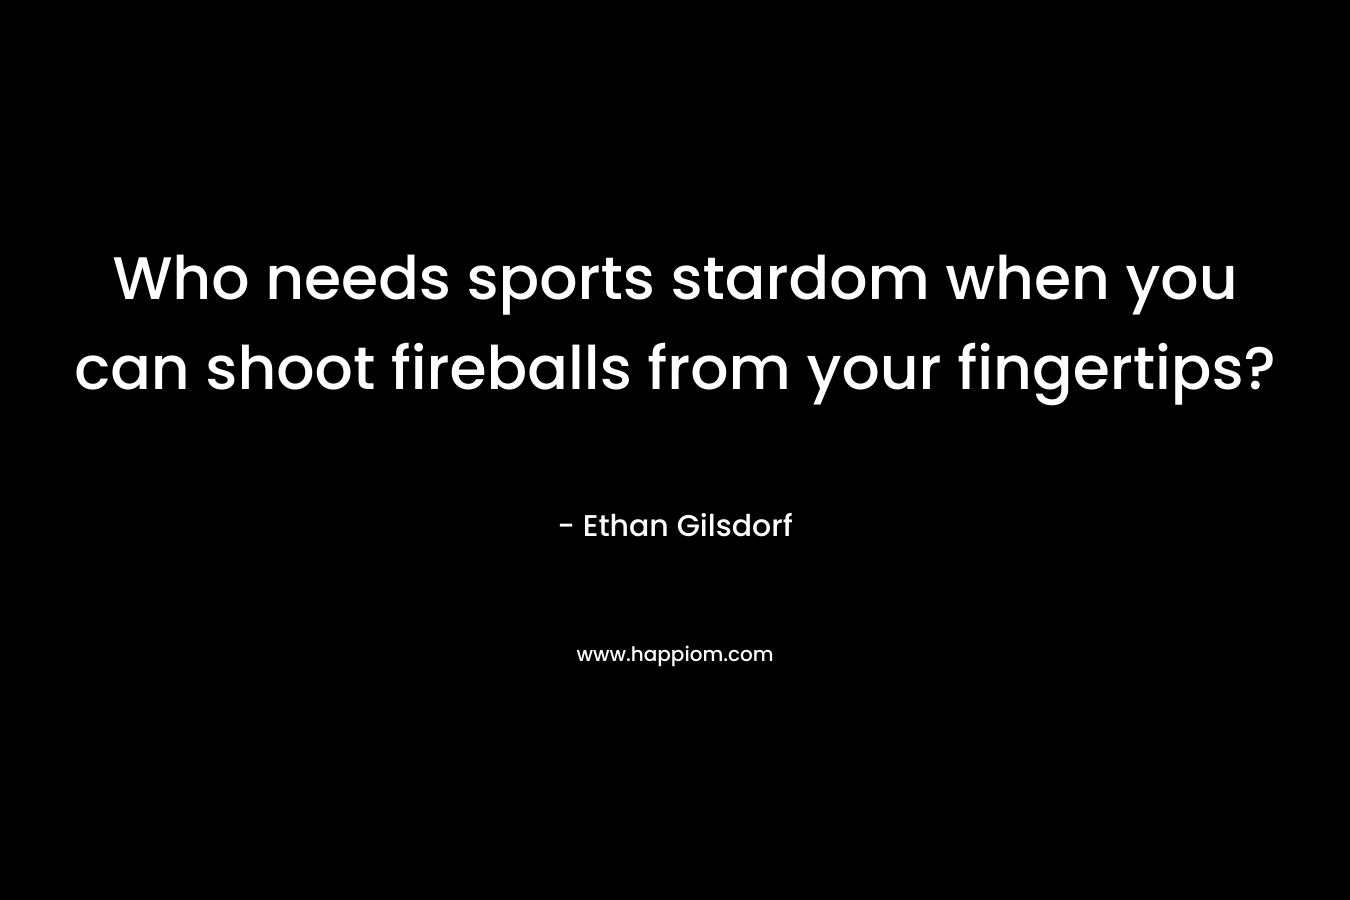 Who needs sports stardom when you can shoot fireballs from your fingertips? – Ethan Gilsdorf